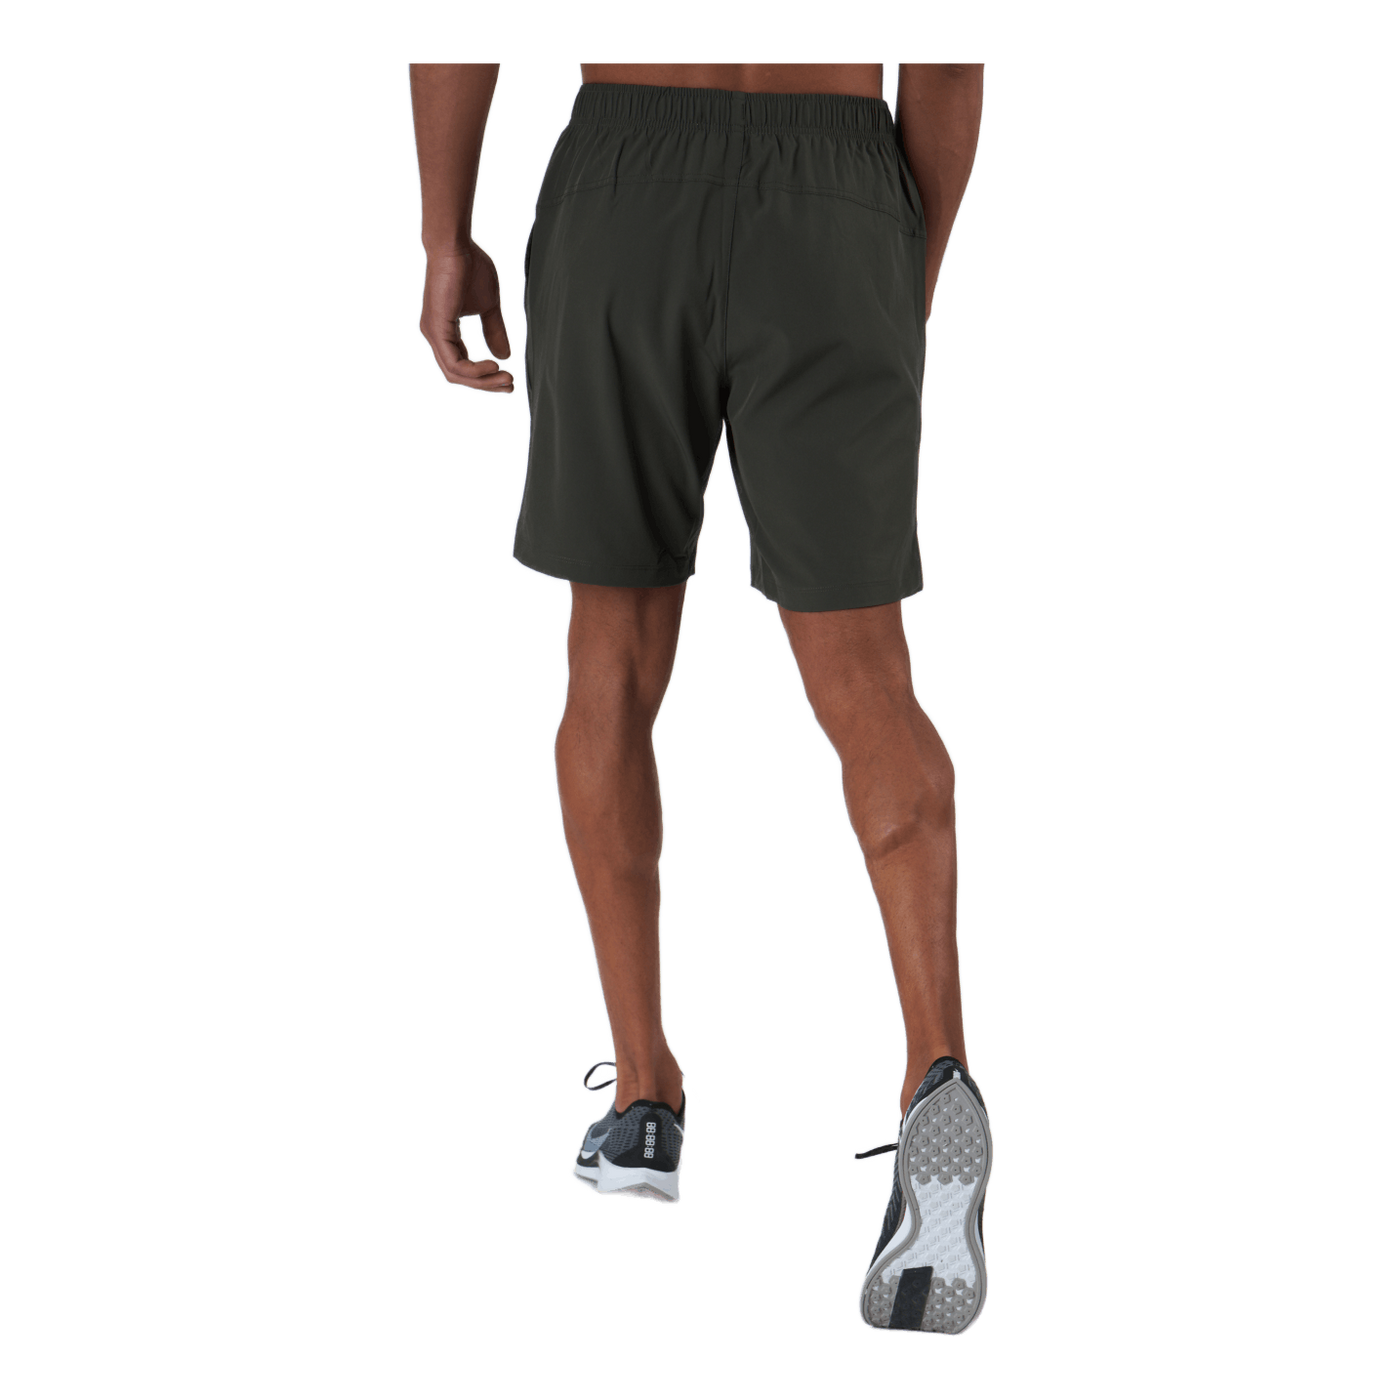 M Training Shorts Forest Green